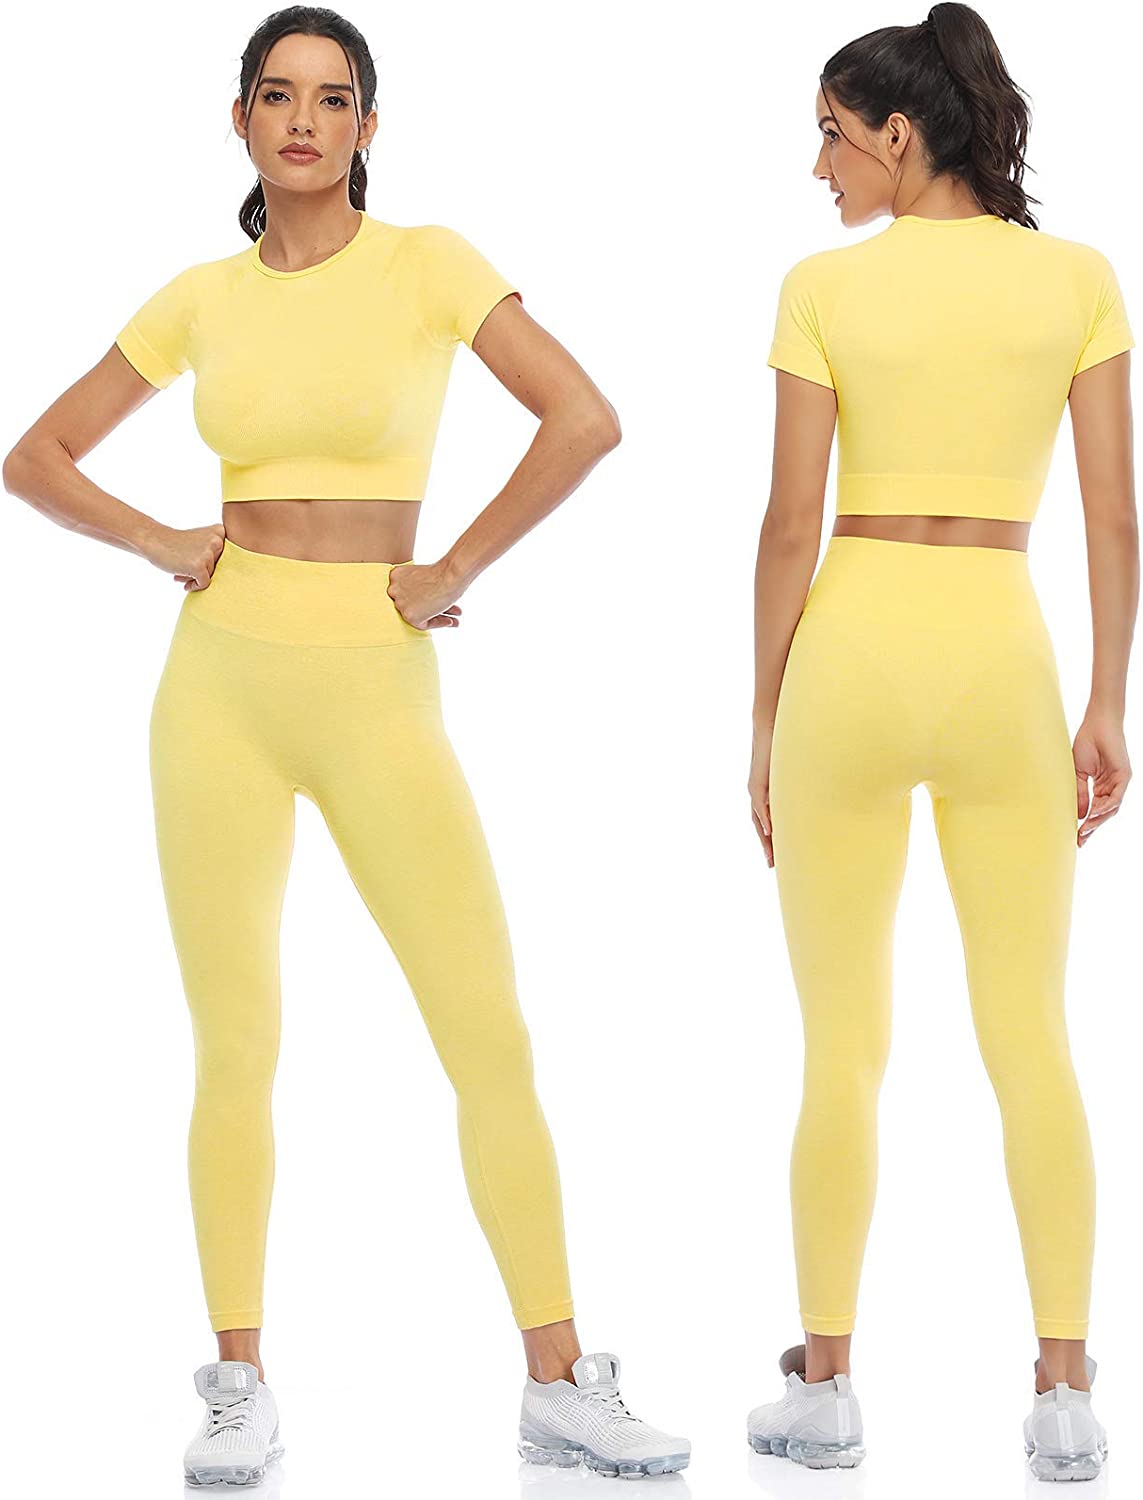 PINKSAVIOR Women's Two Piece Outfits Yoga Pants Set Seamless High Waist  Leggings and Quick-Dry Yoga Crop Tops Athletic Sports Set, Yellow